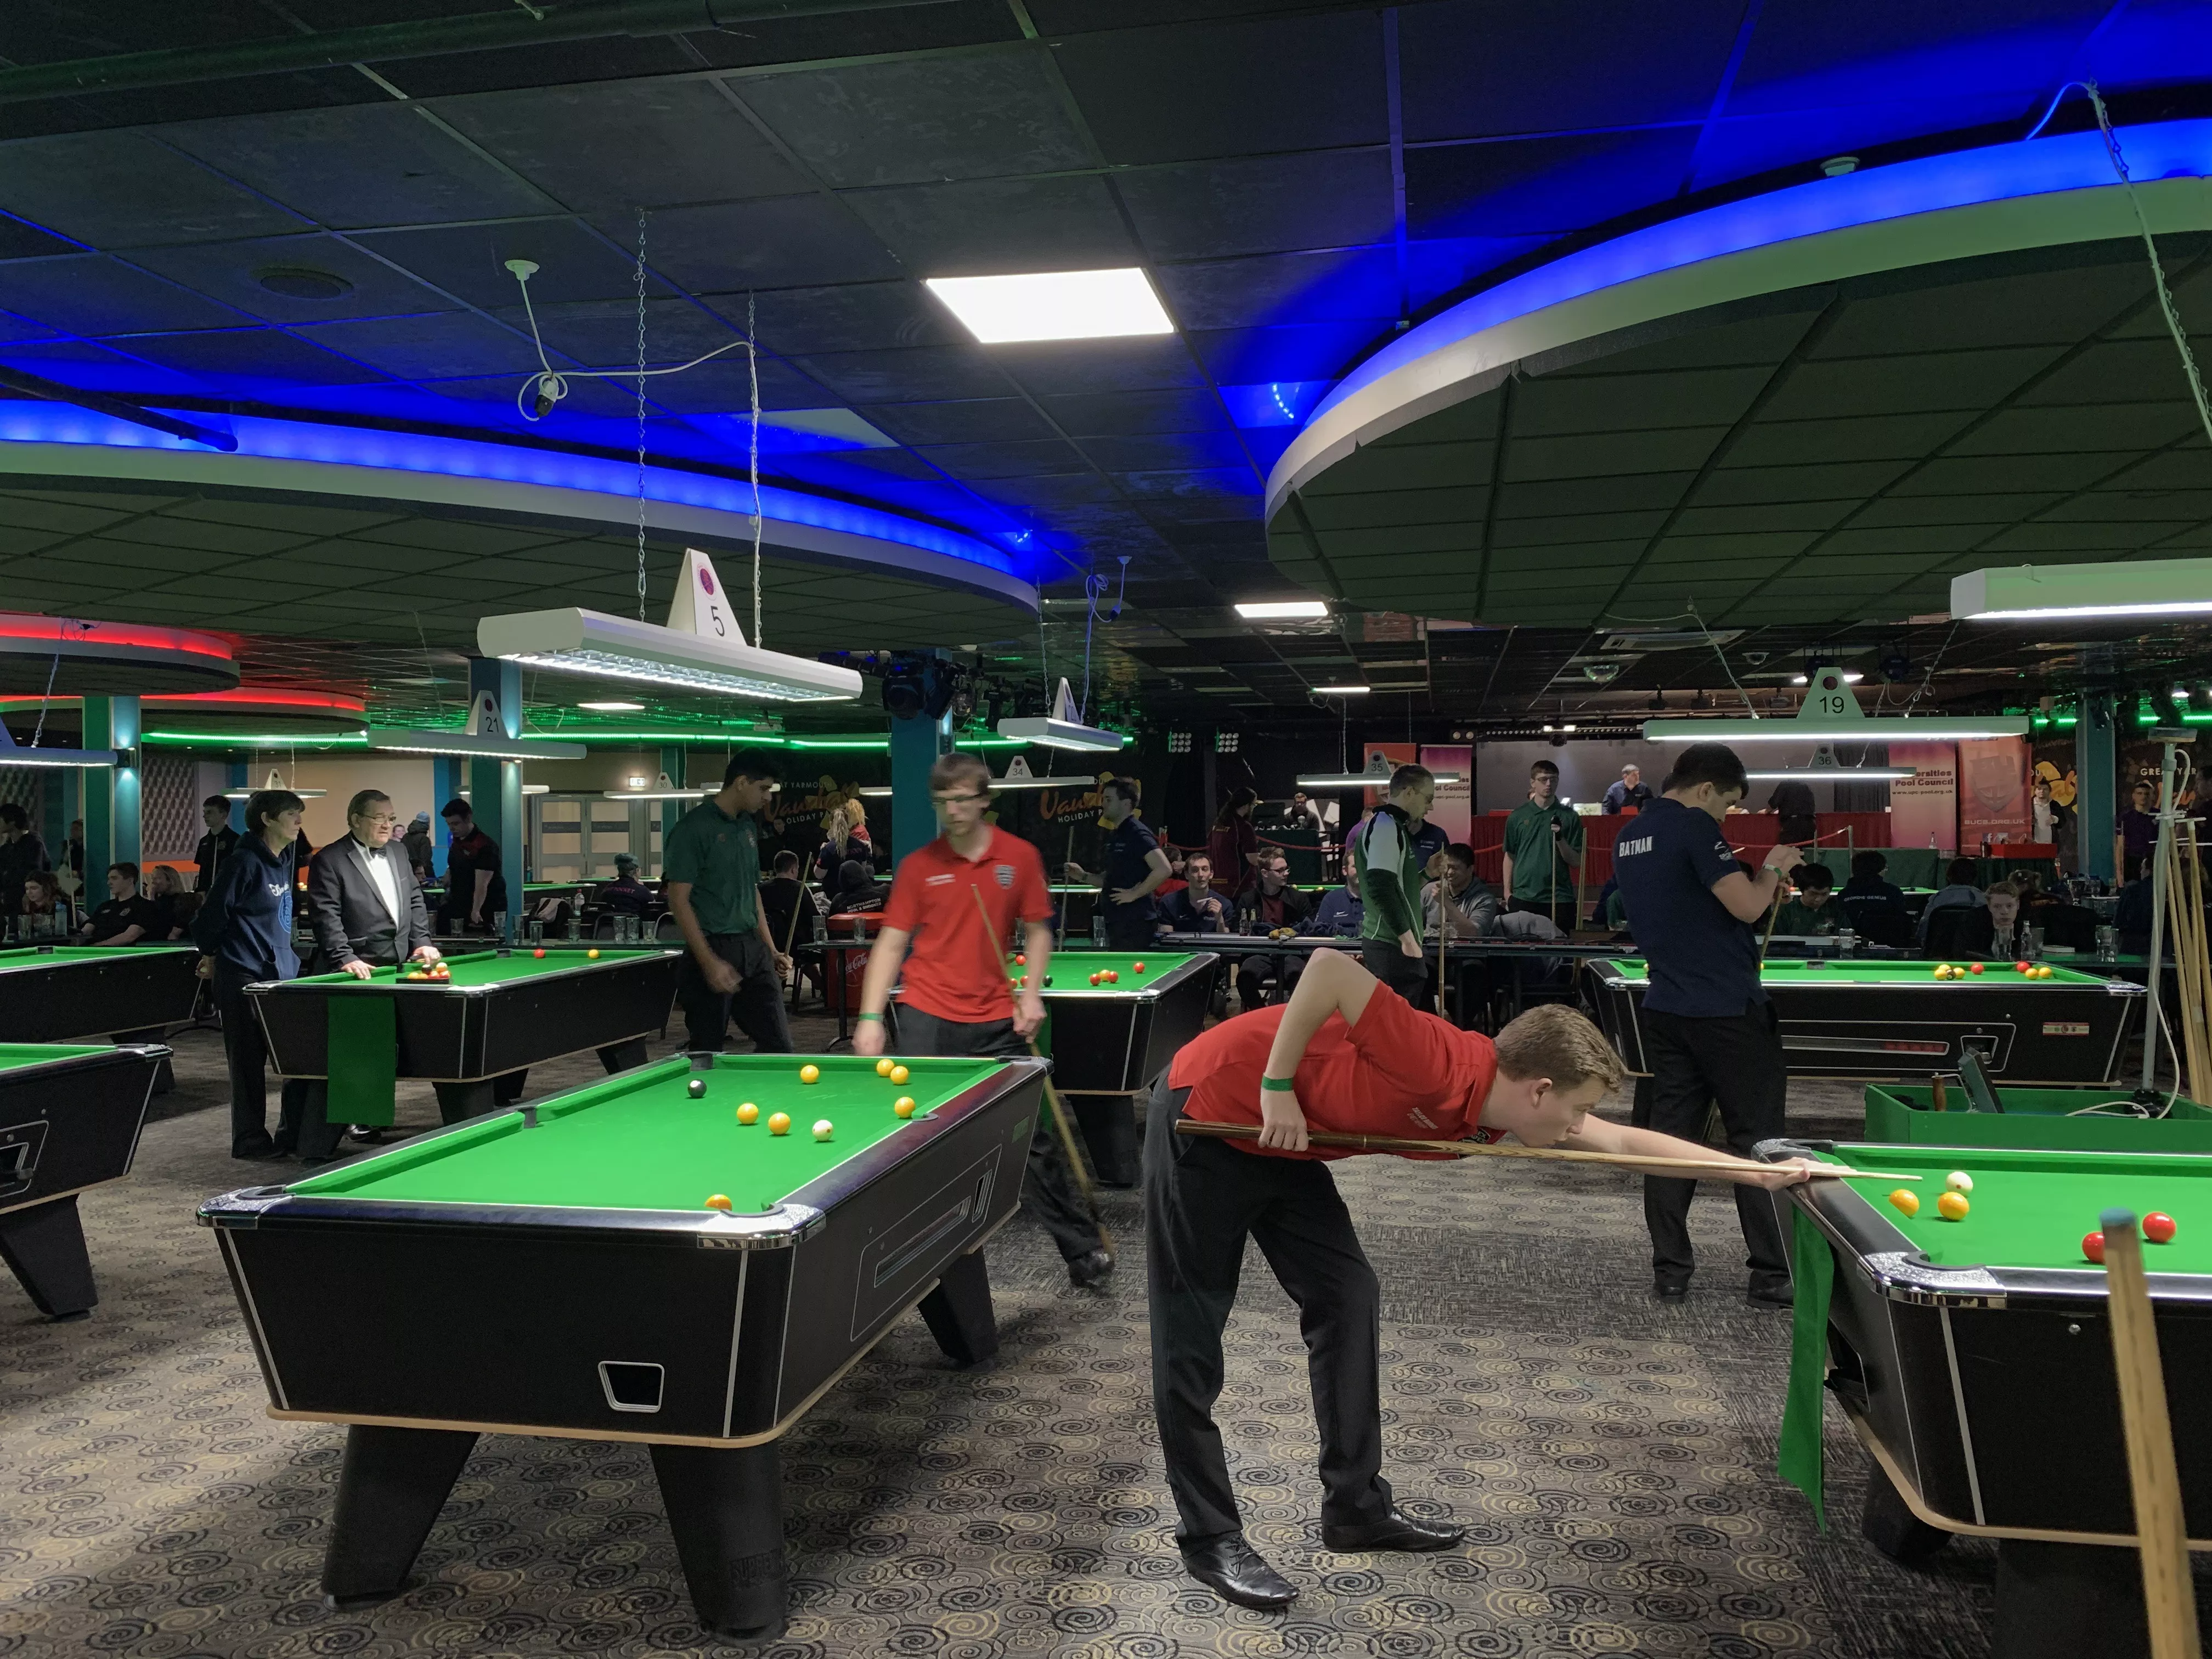 Black Ball Pool Club in Poland, Europe | Billiards - Rated 3.6